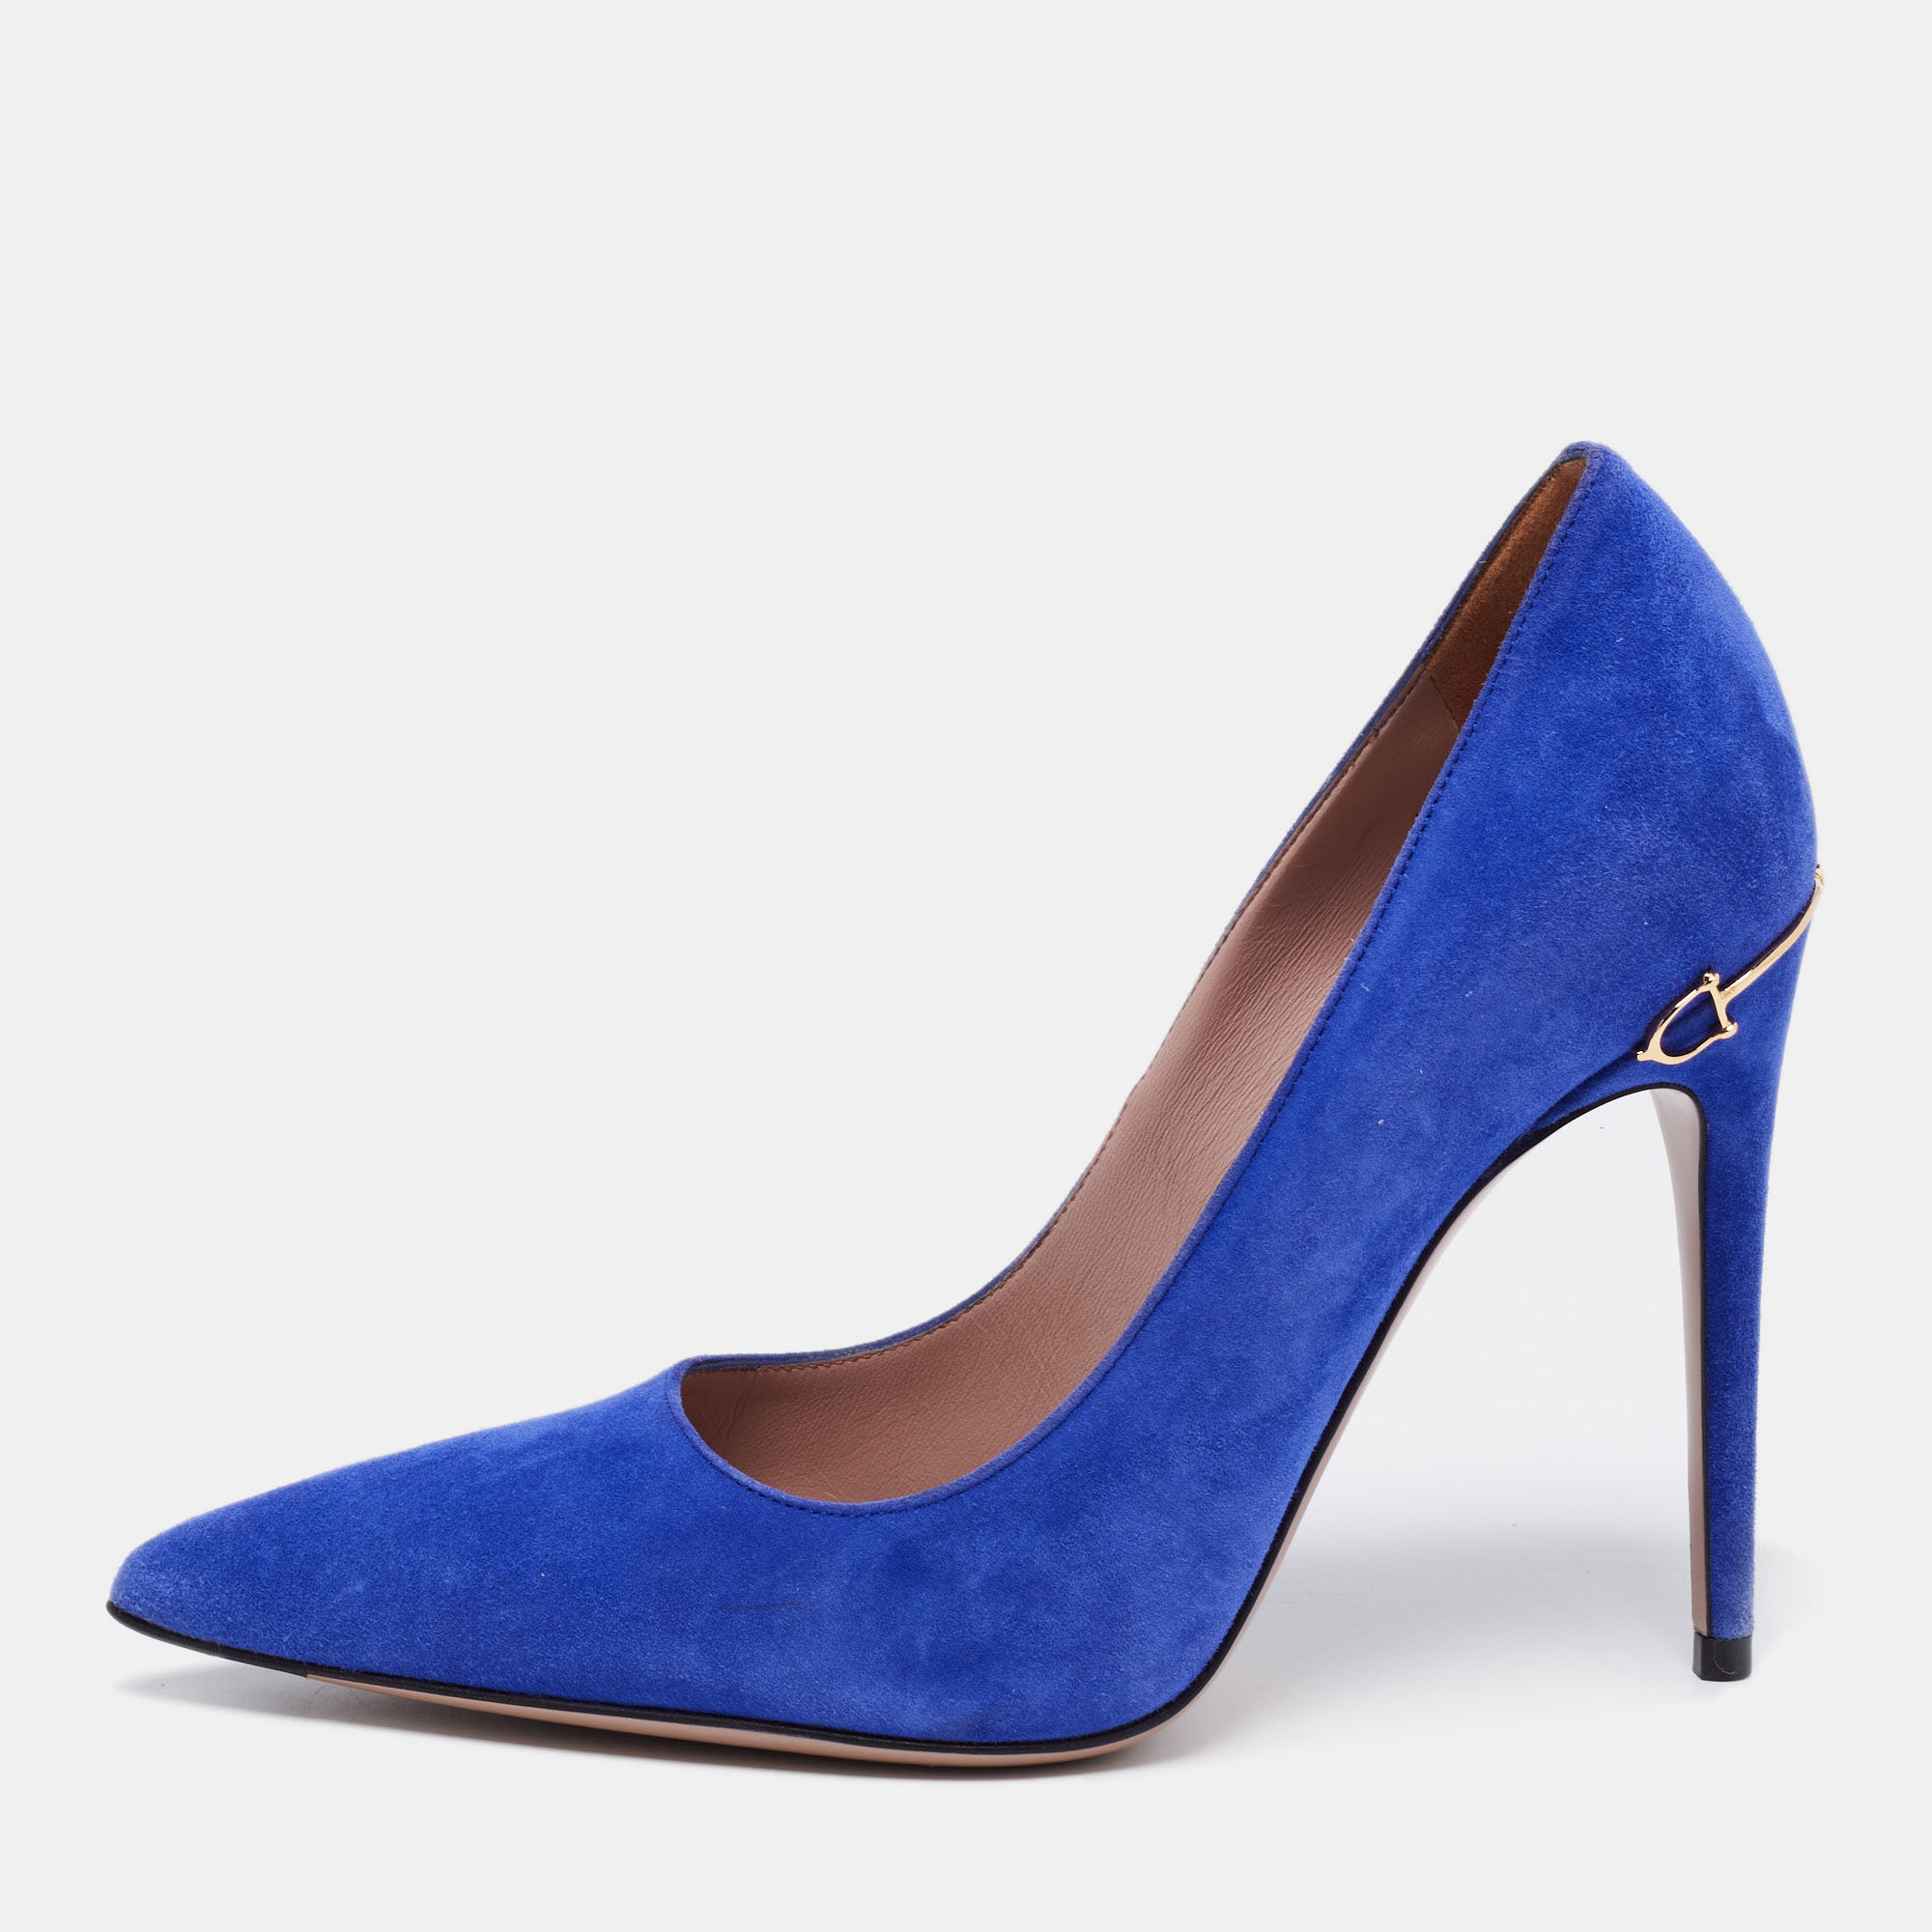 Take every step with elegance and style in these gorgeous pumps from the House of Gucci. They are crafted meticulously using blue suede. They showcase pointed toes slender heels and a slip on feature. These beautiful Gucci pumps will be your favorite pair in no time